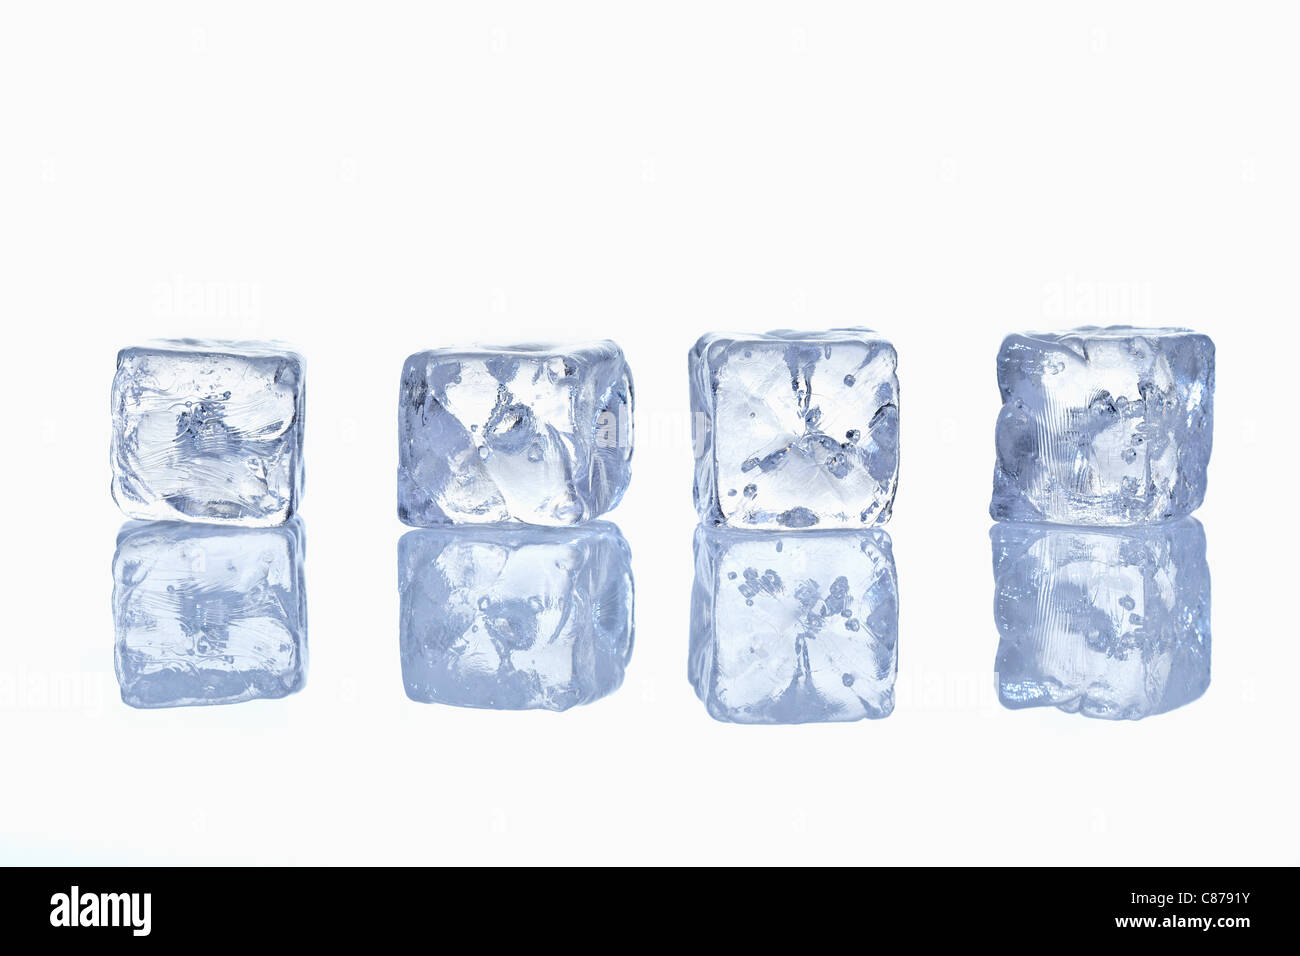 Four ice cubes in row with reflection on glass Stock Photo - Alamy